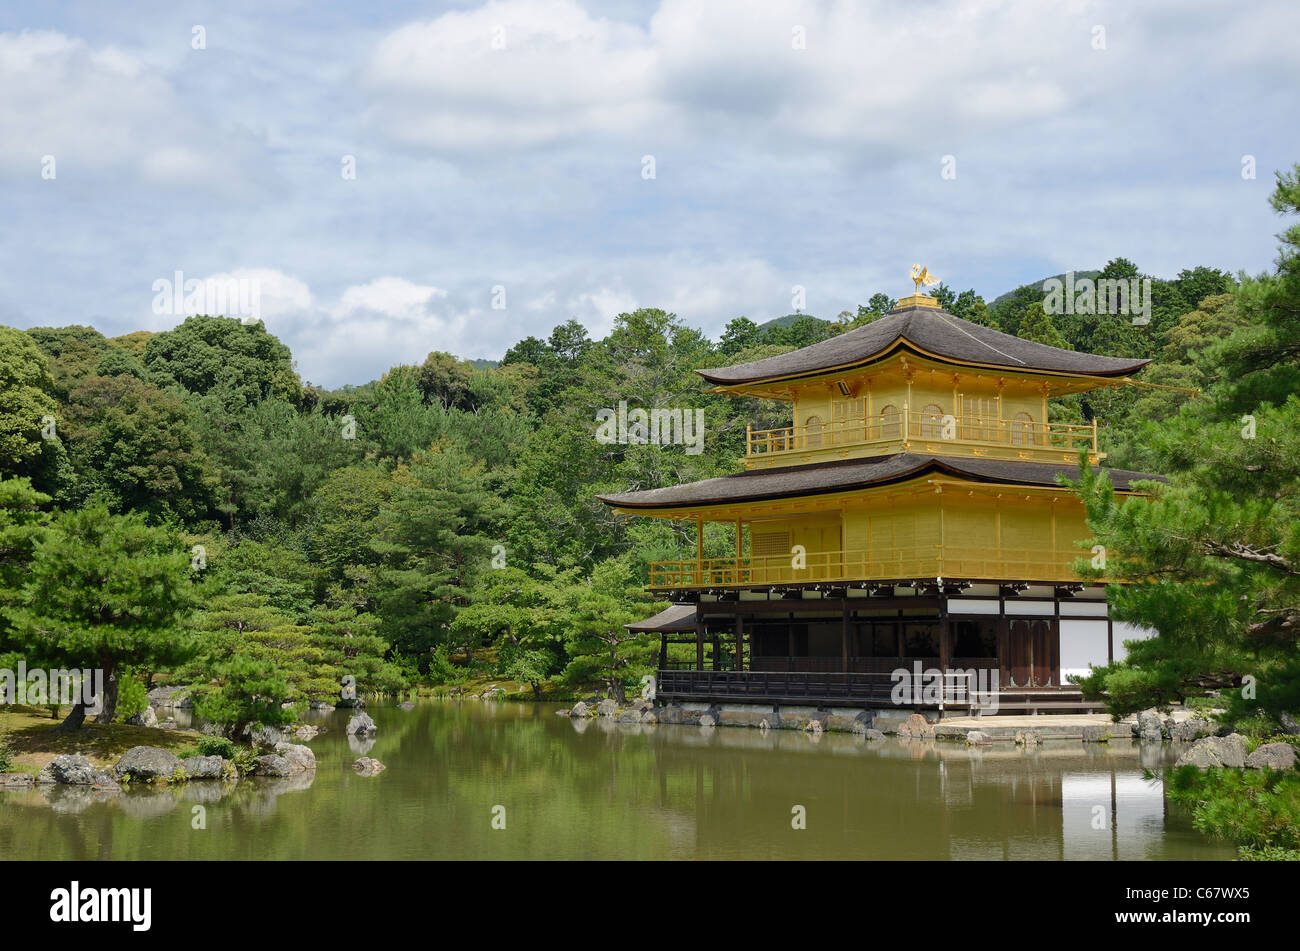 Temple of the Golden Pavilion, known a Kinkaku-ji, is a Buddhist Temple and a World Heritage Site in Kyoto, Japan. Stock Photo